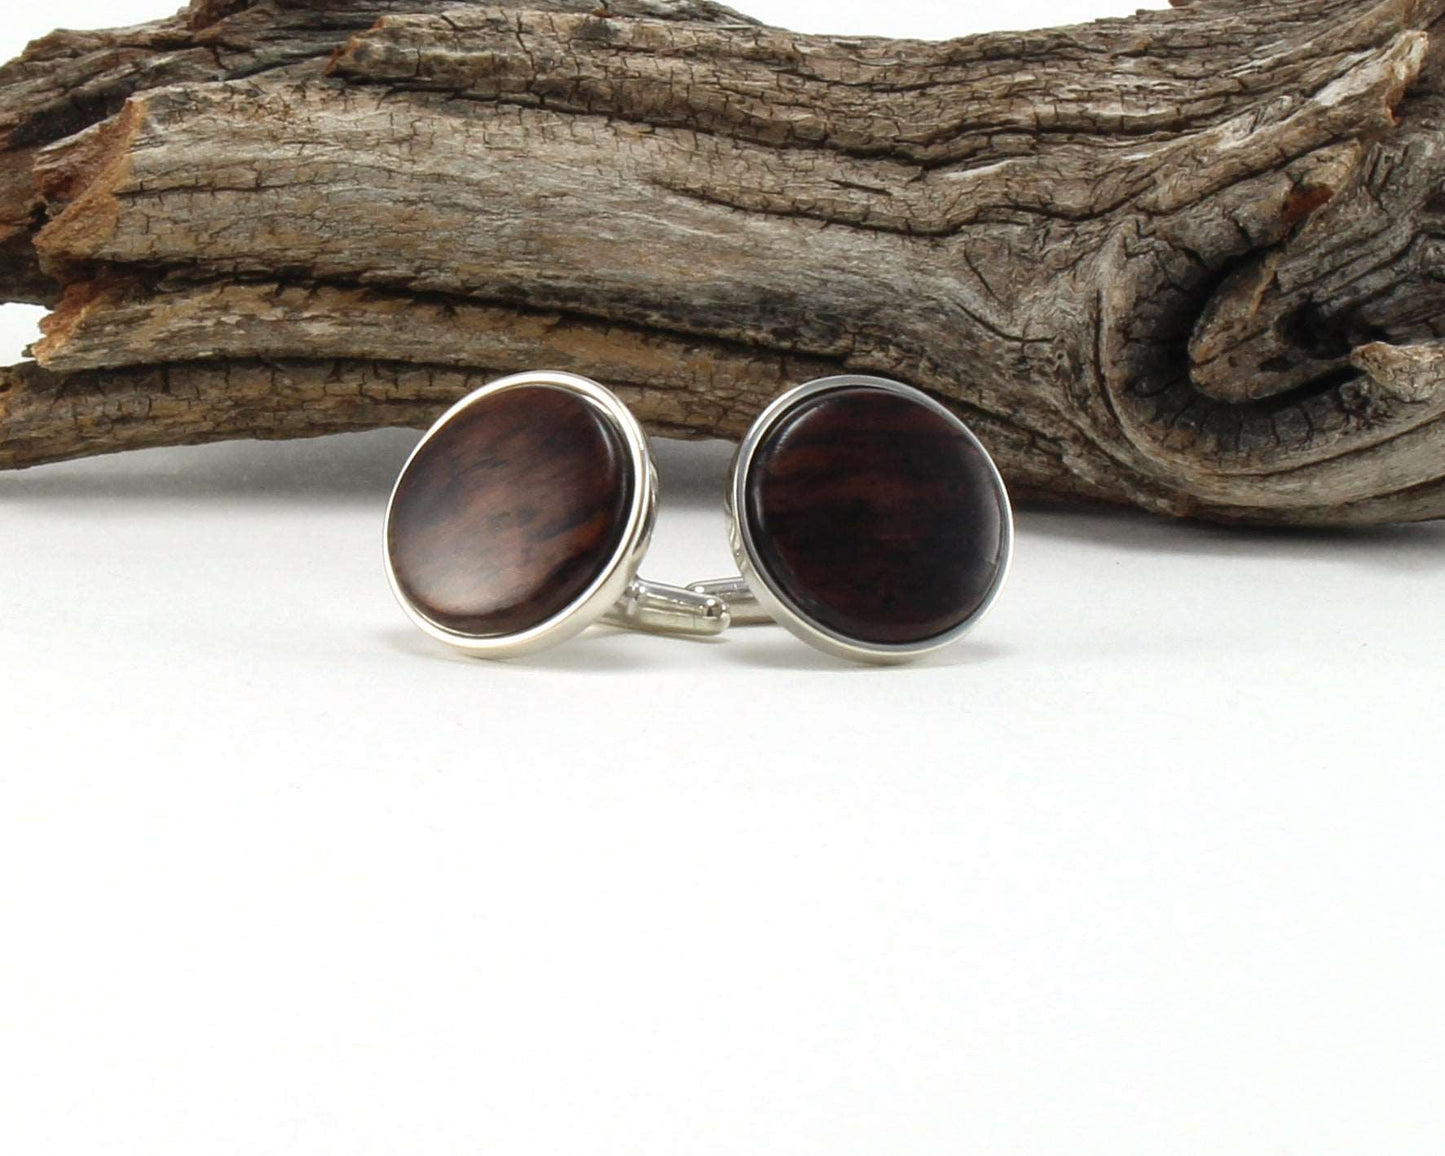 925 Sterling Silver Cuff Links with East Indian Rose Wood Inlay